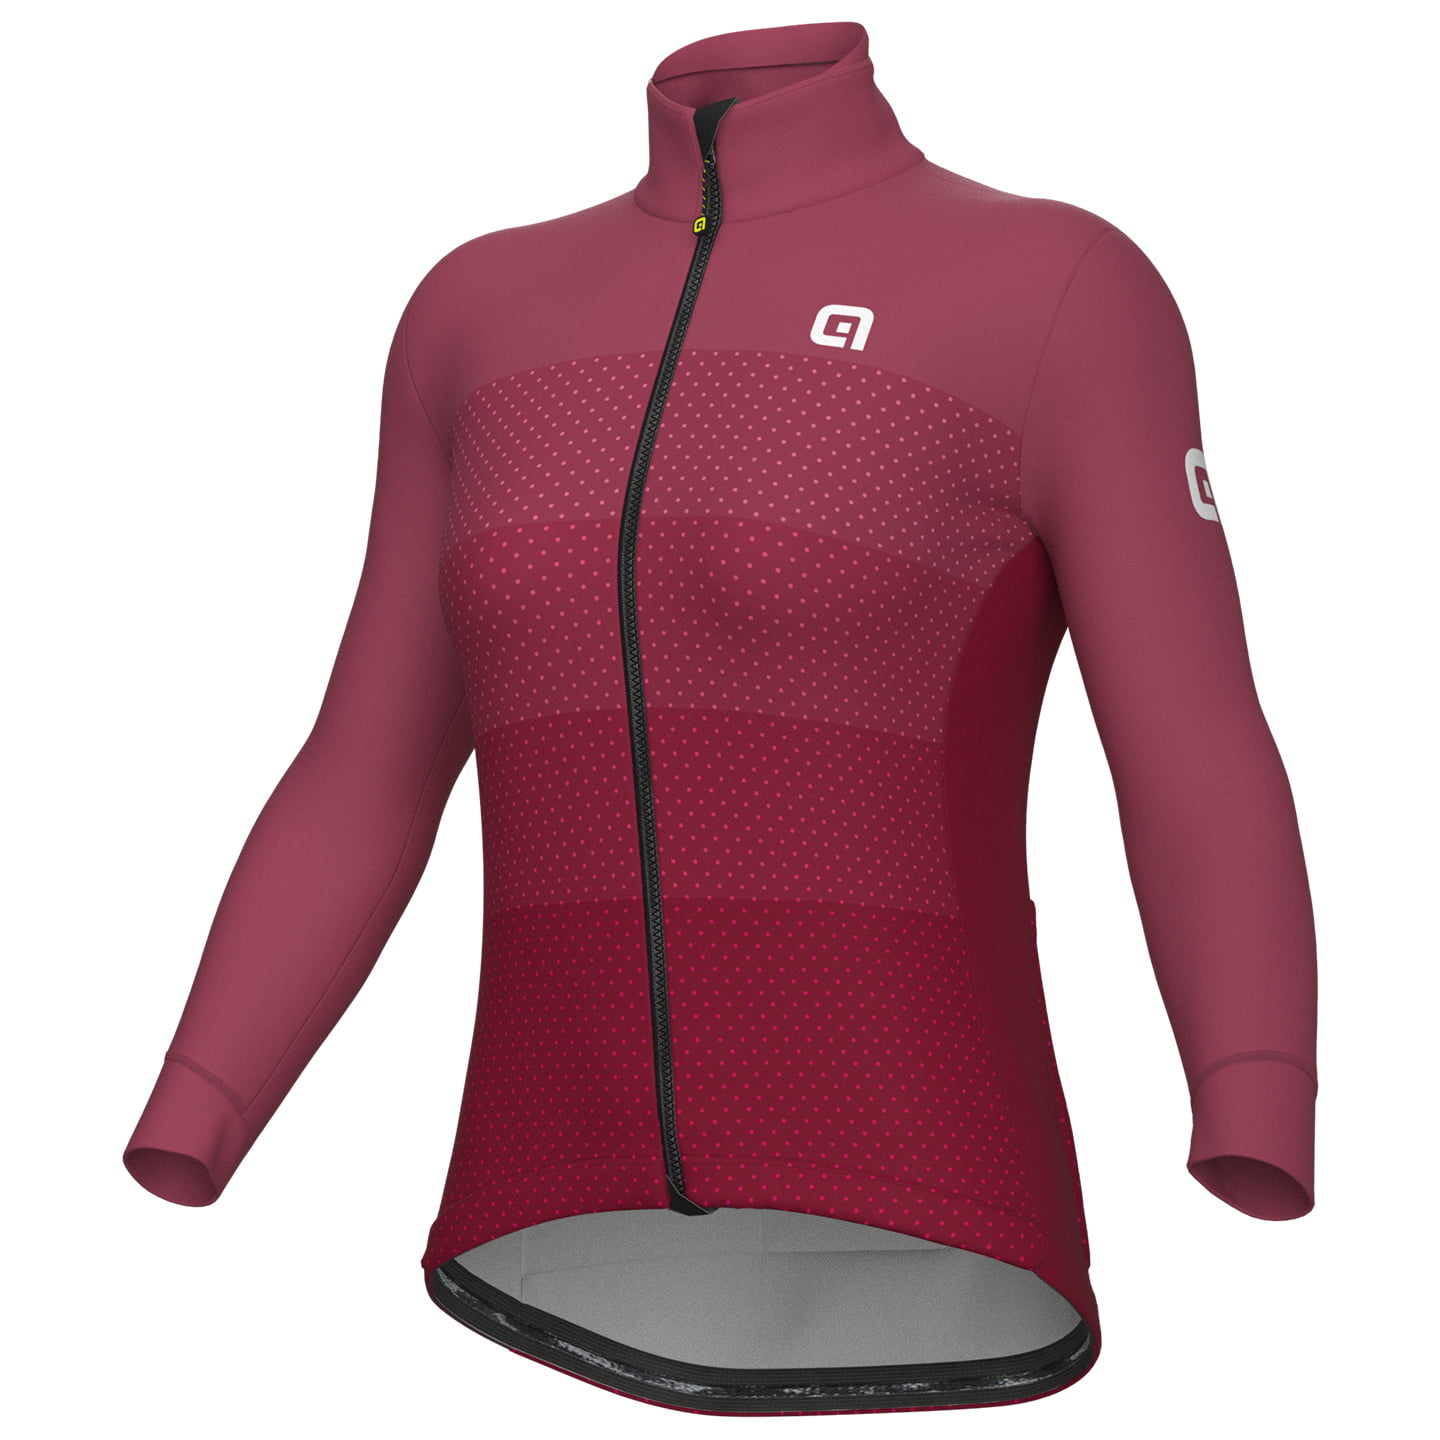 ALE Level Women’s Winter Jacket Women’s Thermal Jacket, size XL, Winter jacket, Cycling clothes